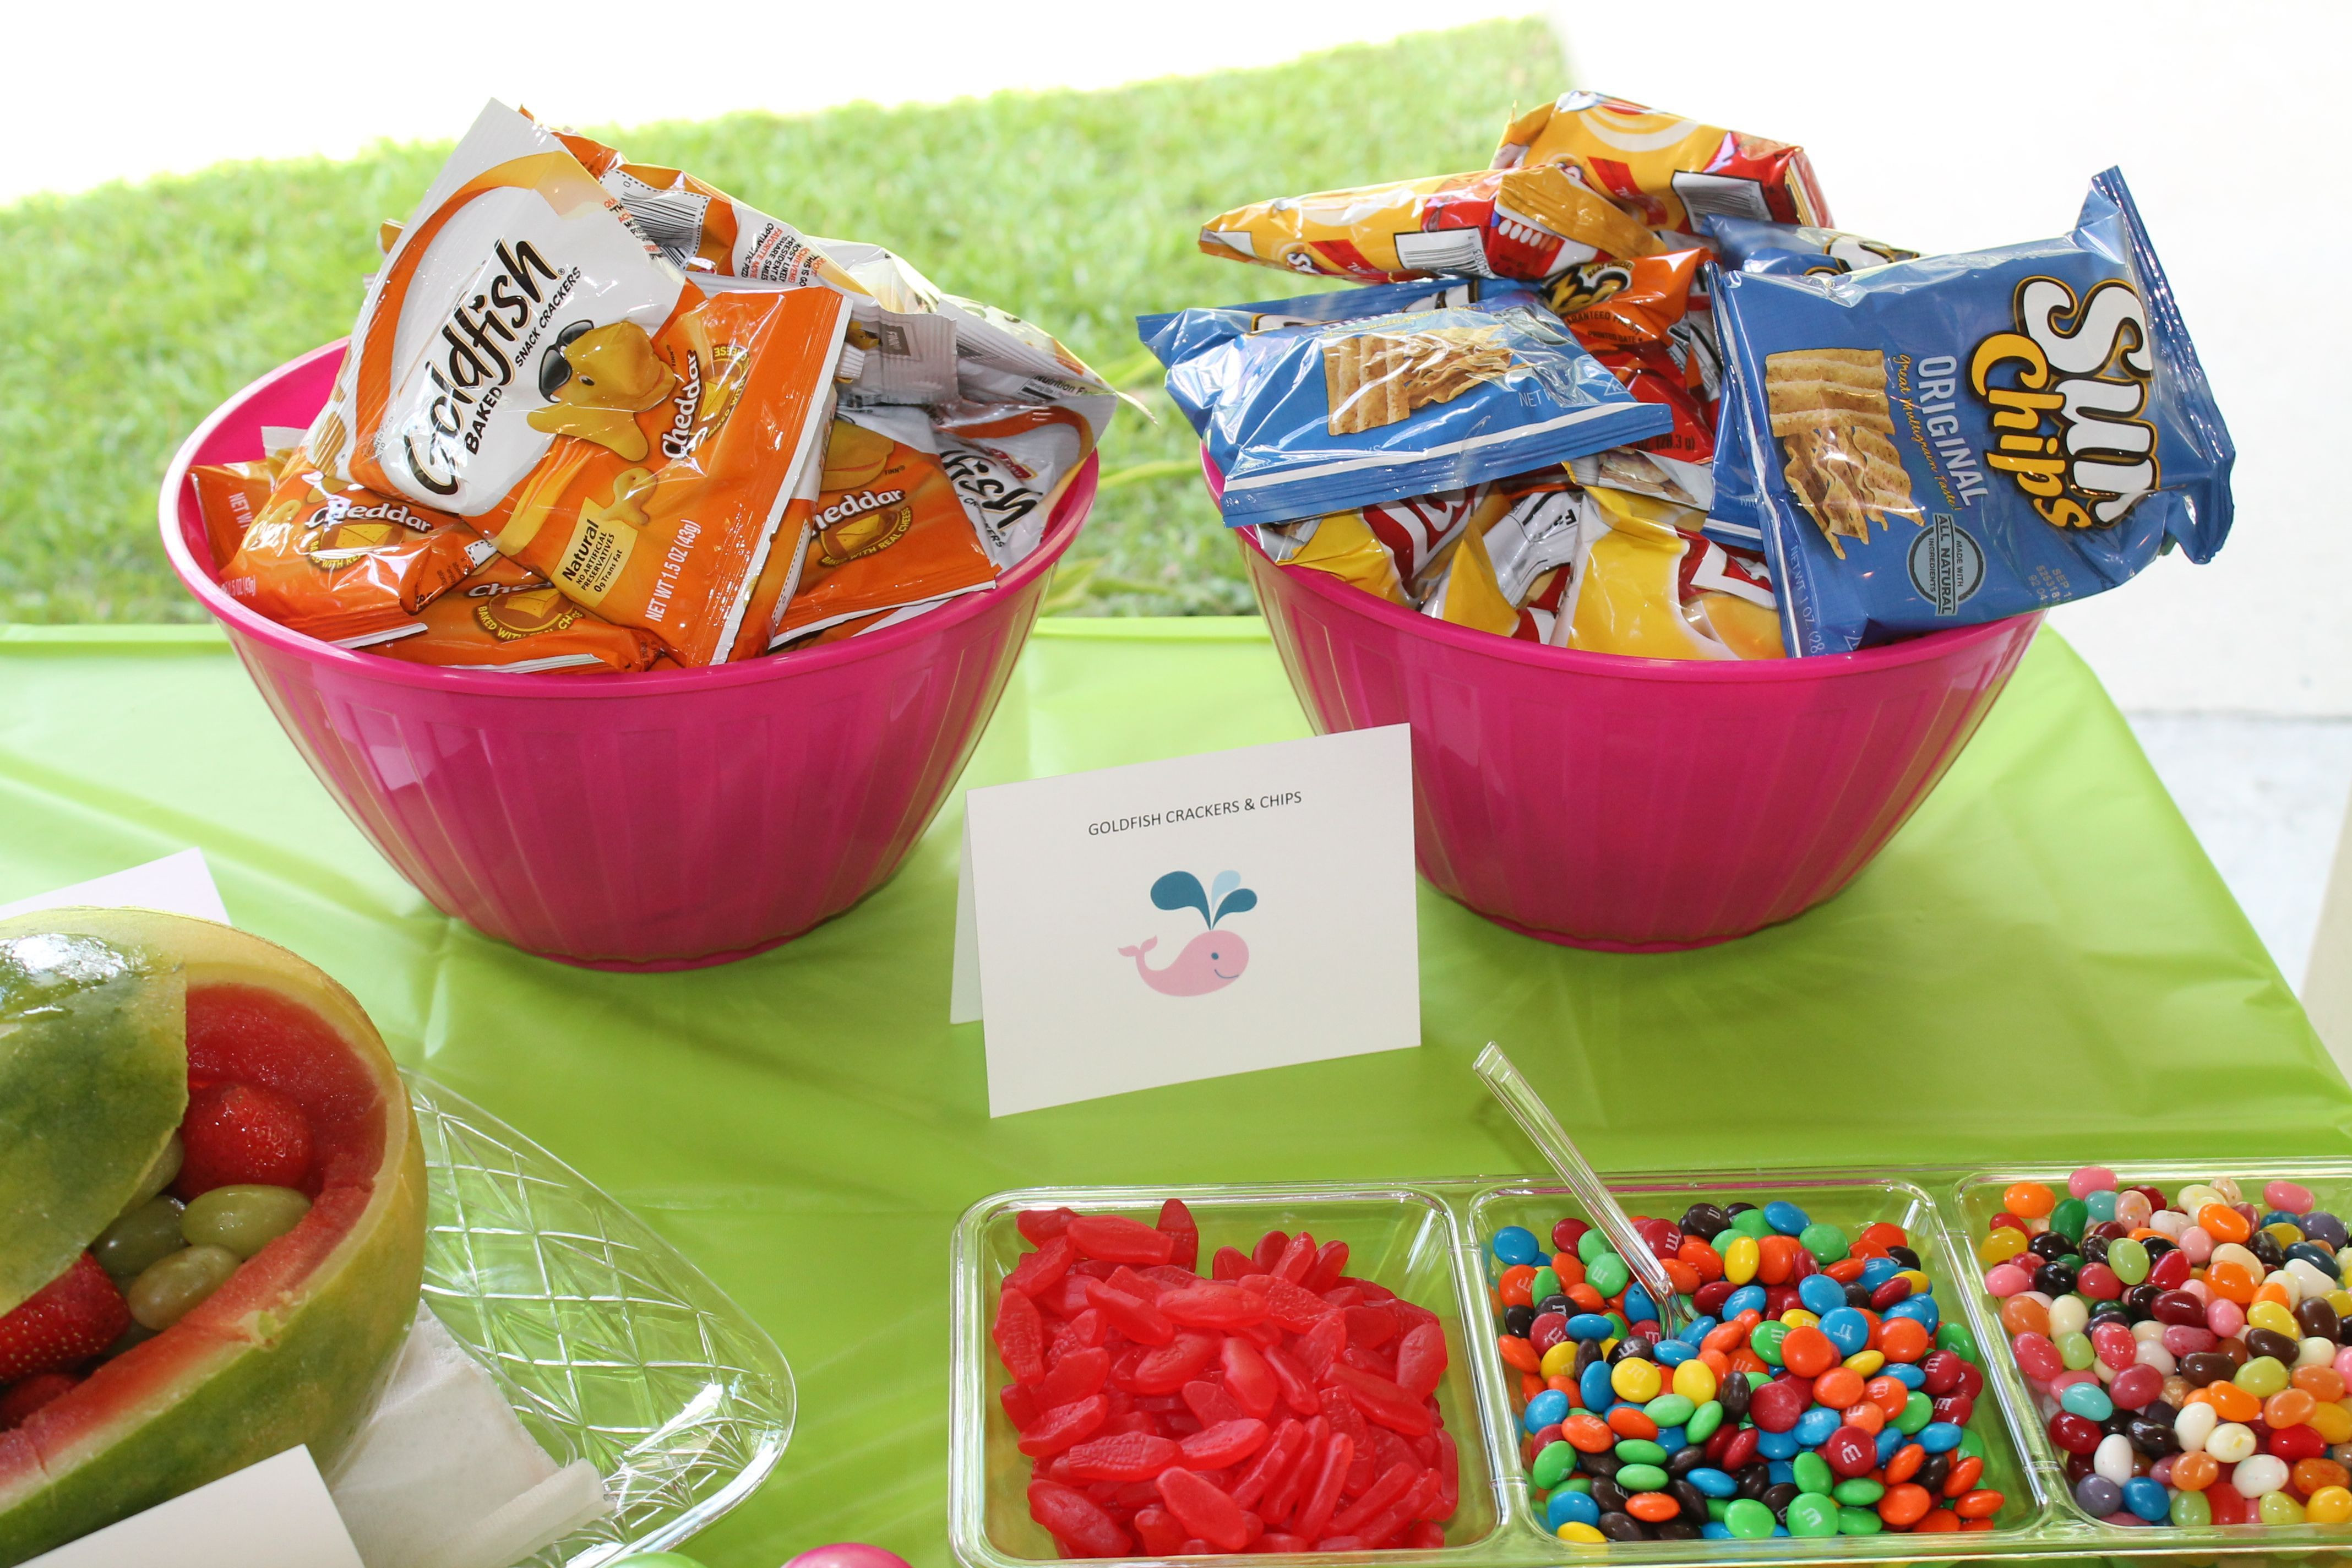 Kids Pool Party Food Ideas
 Goldfish crackers fit the theme but the chips were more